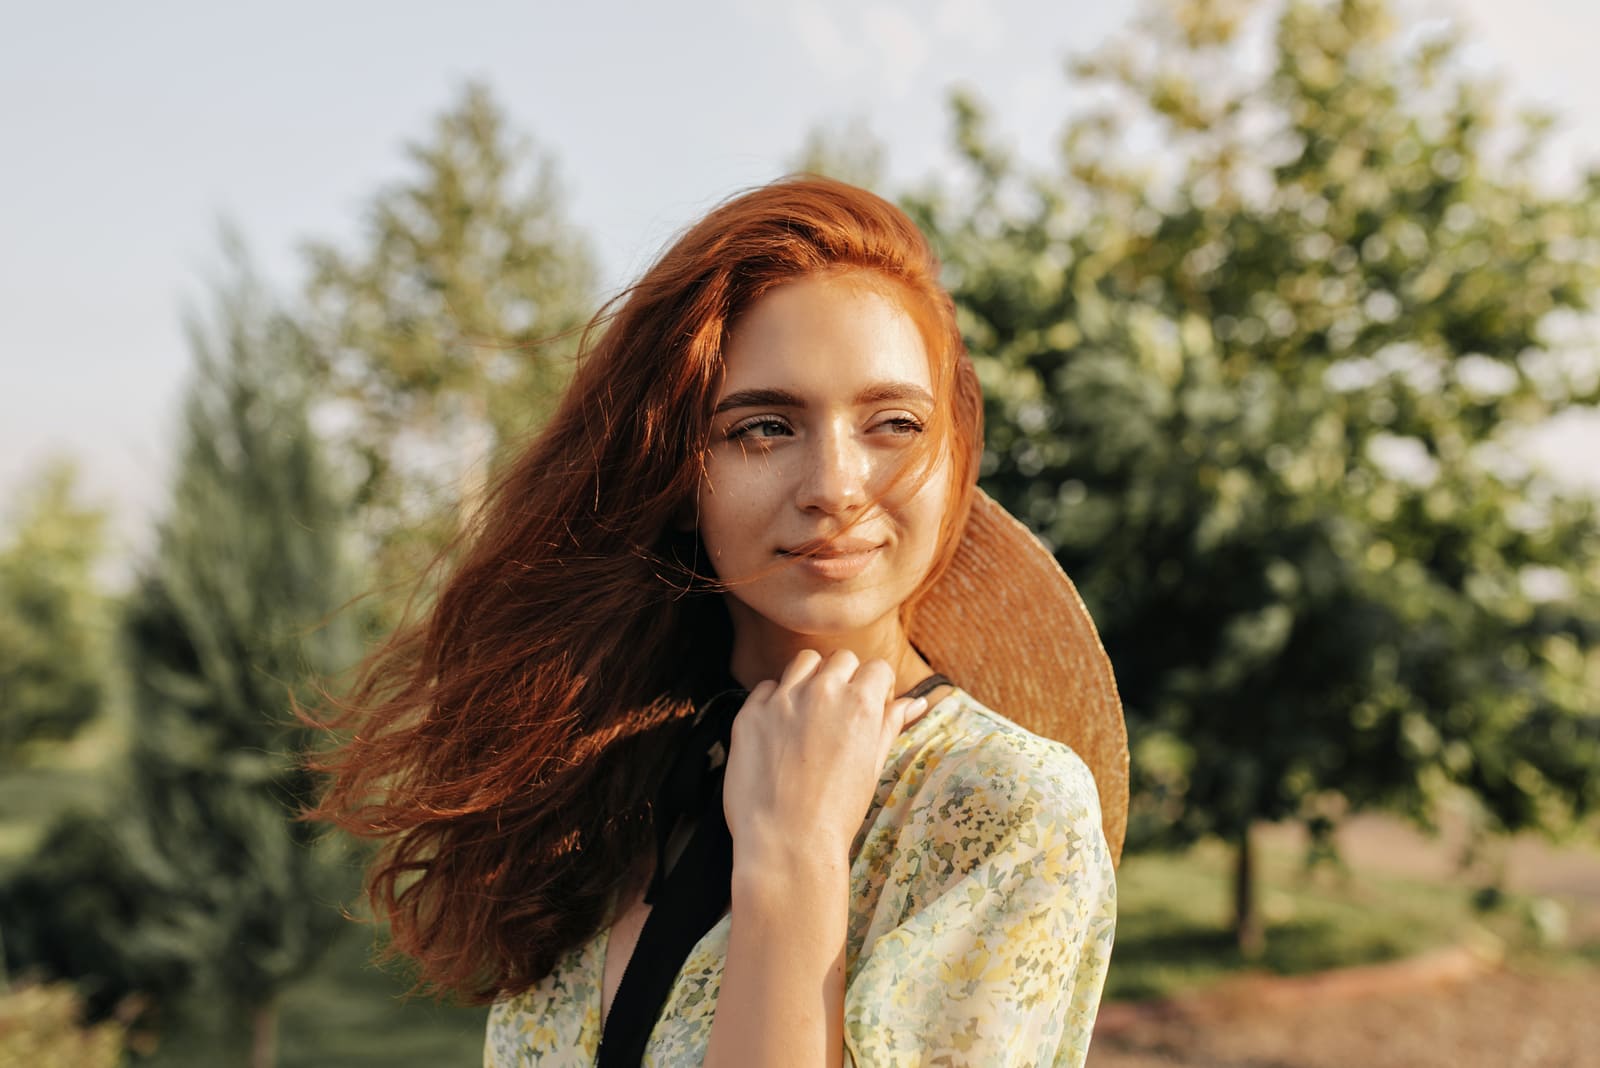 Red haired young woman with cute freckles and brown eyes